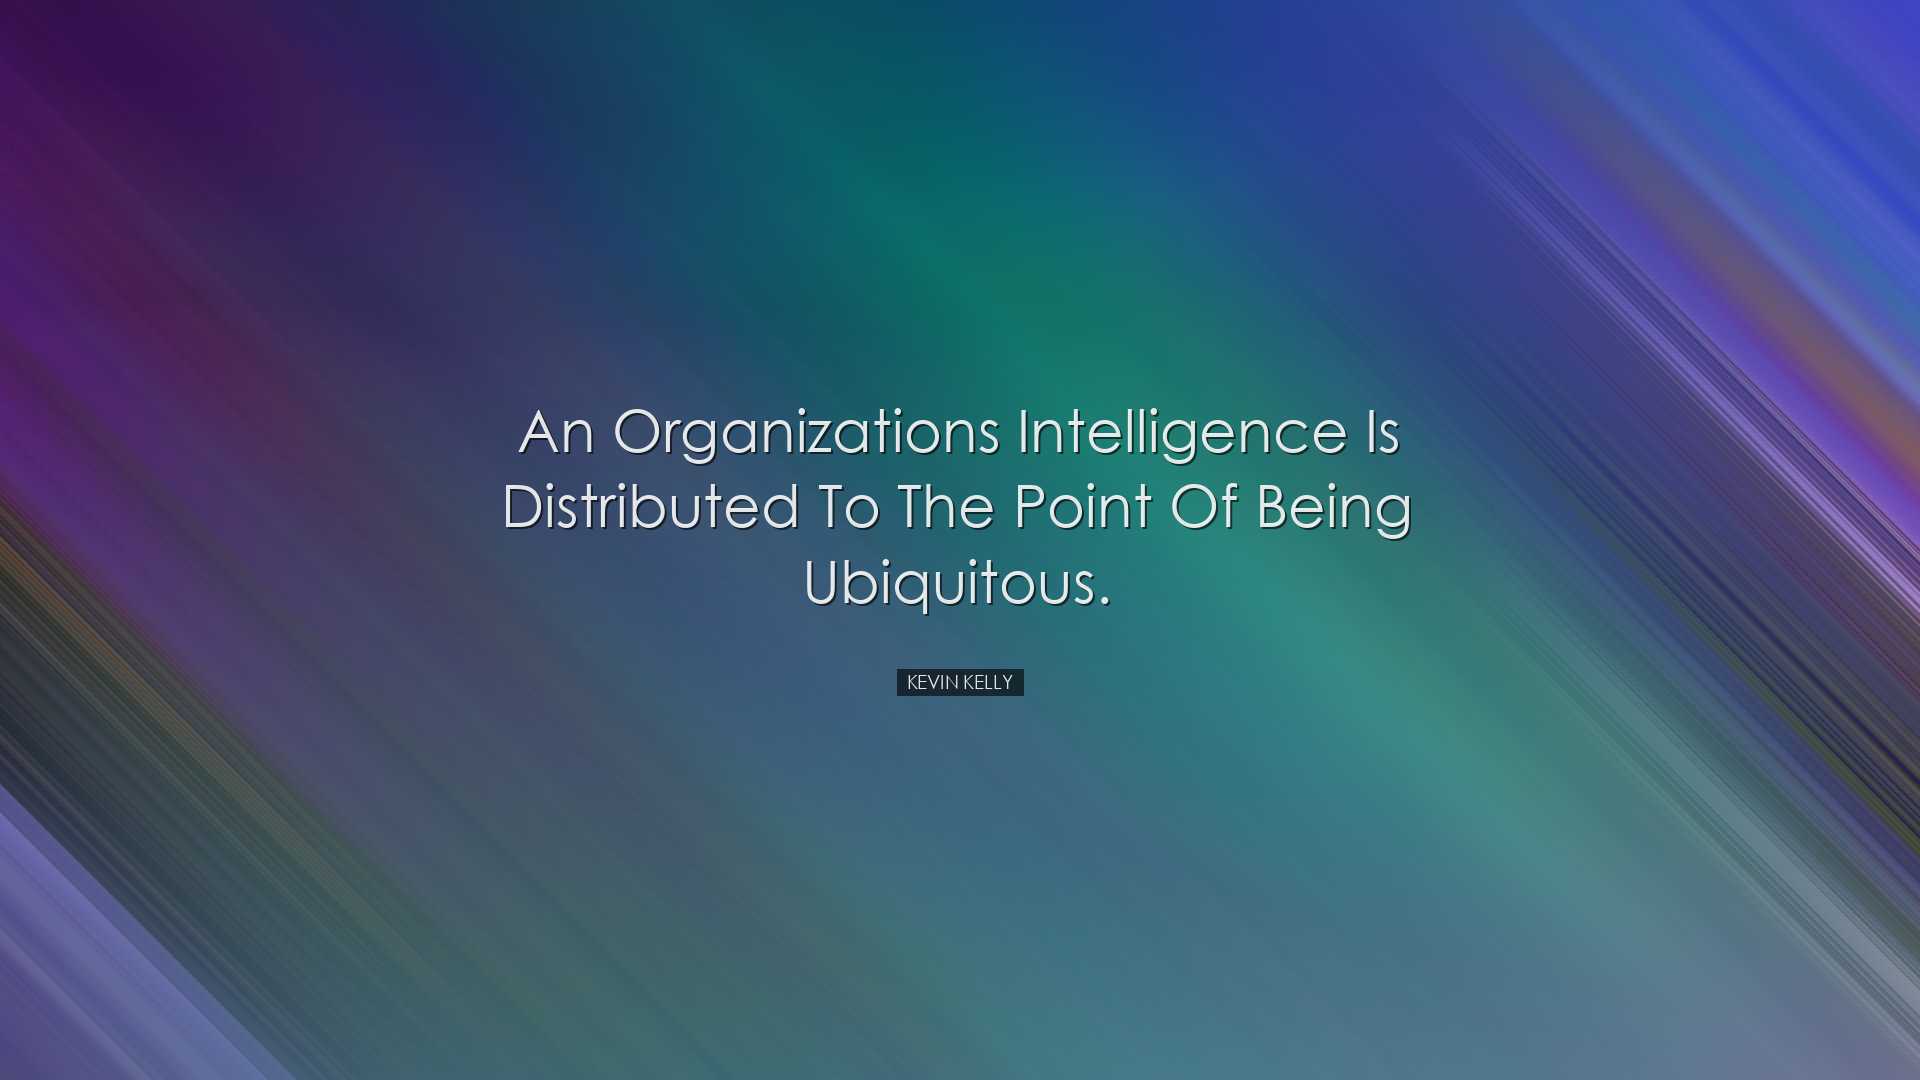 An organizations intelligence is distributed to the point of being